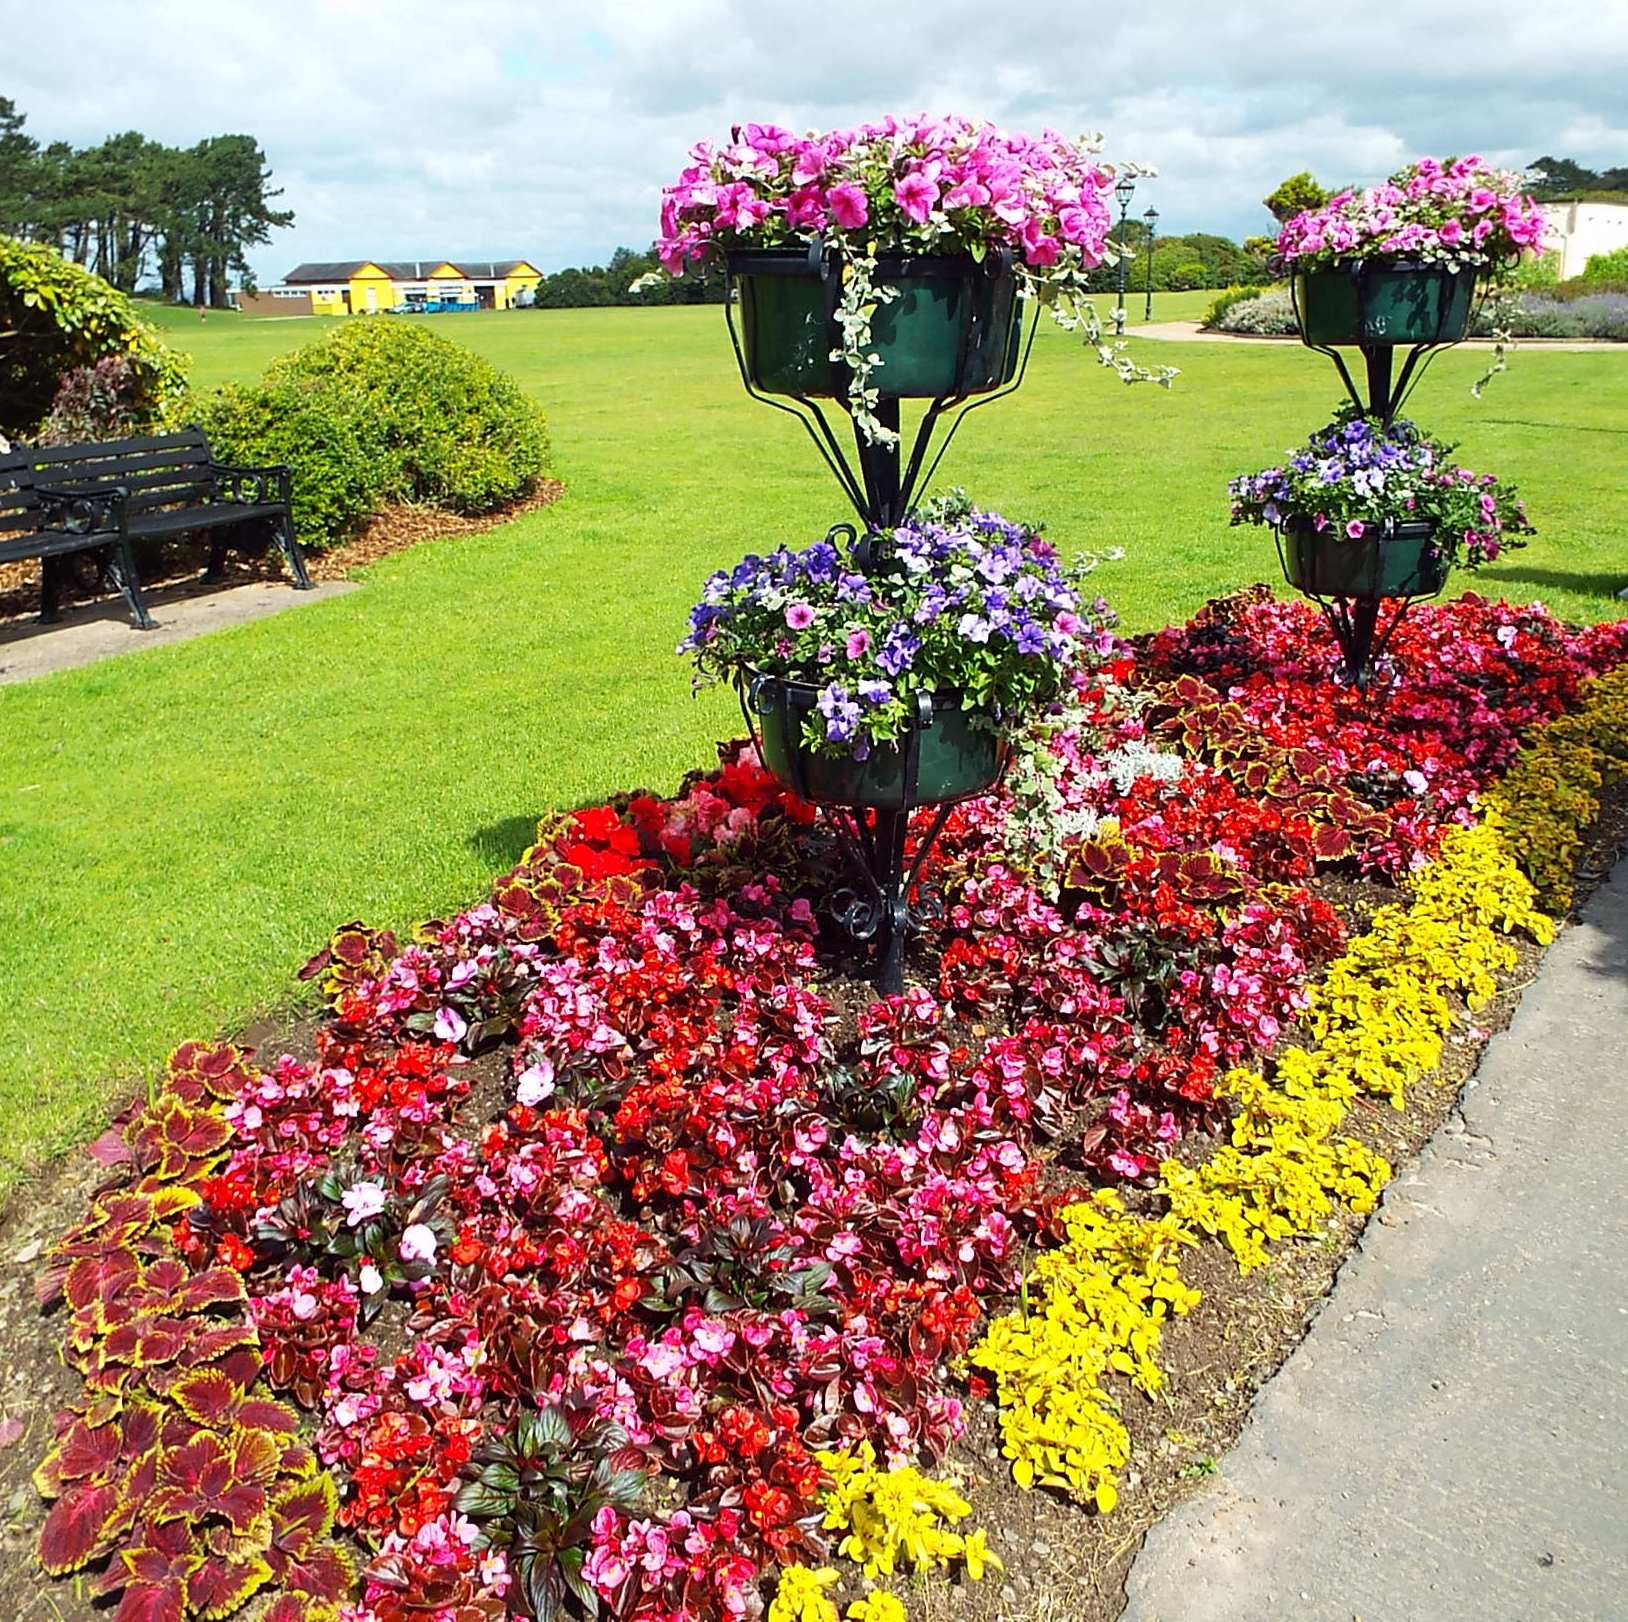 Silloth is absolutely Blooming!! Come and judge for yourself!!